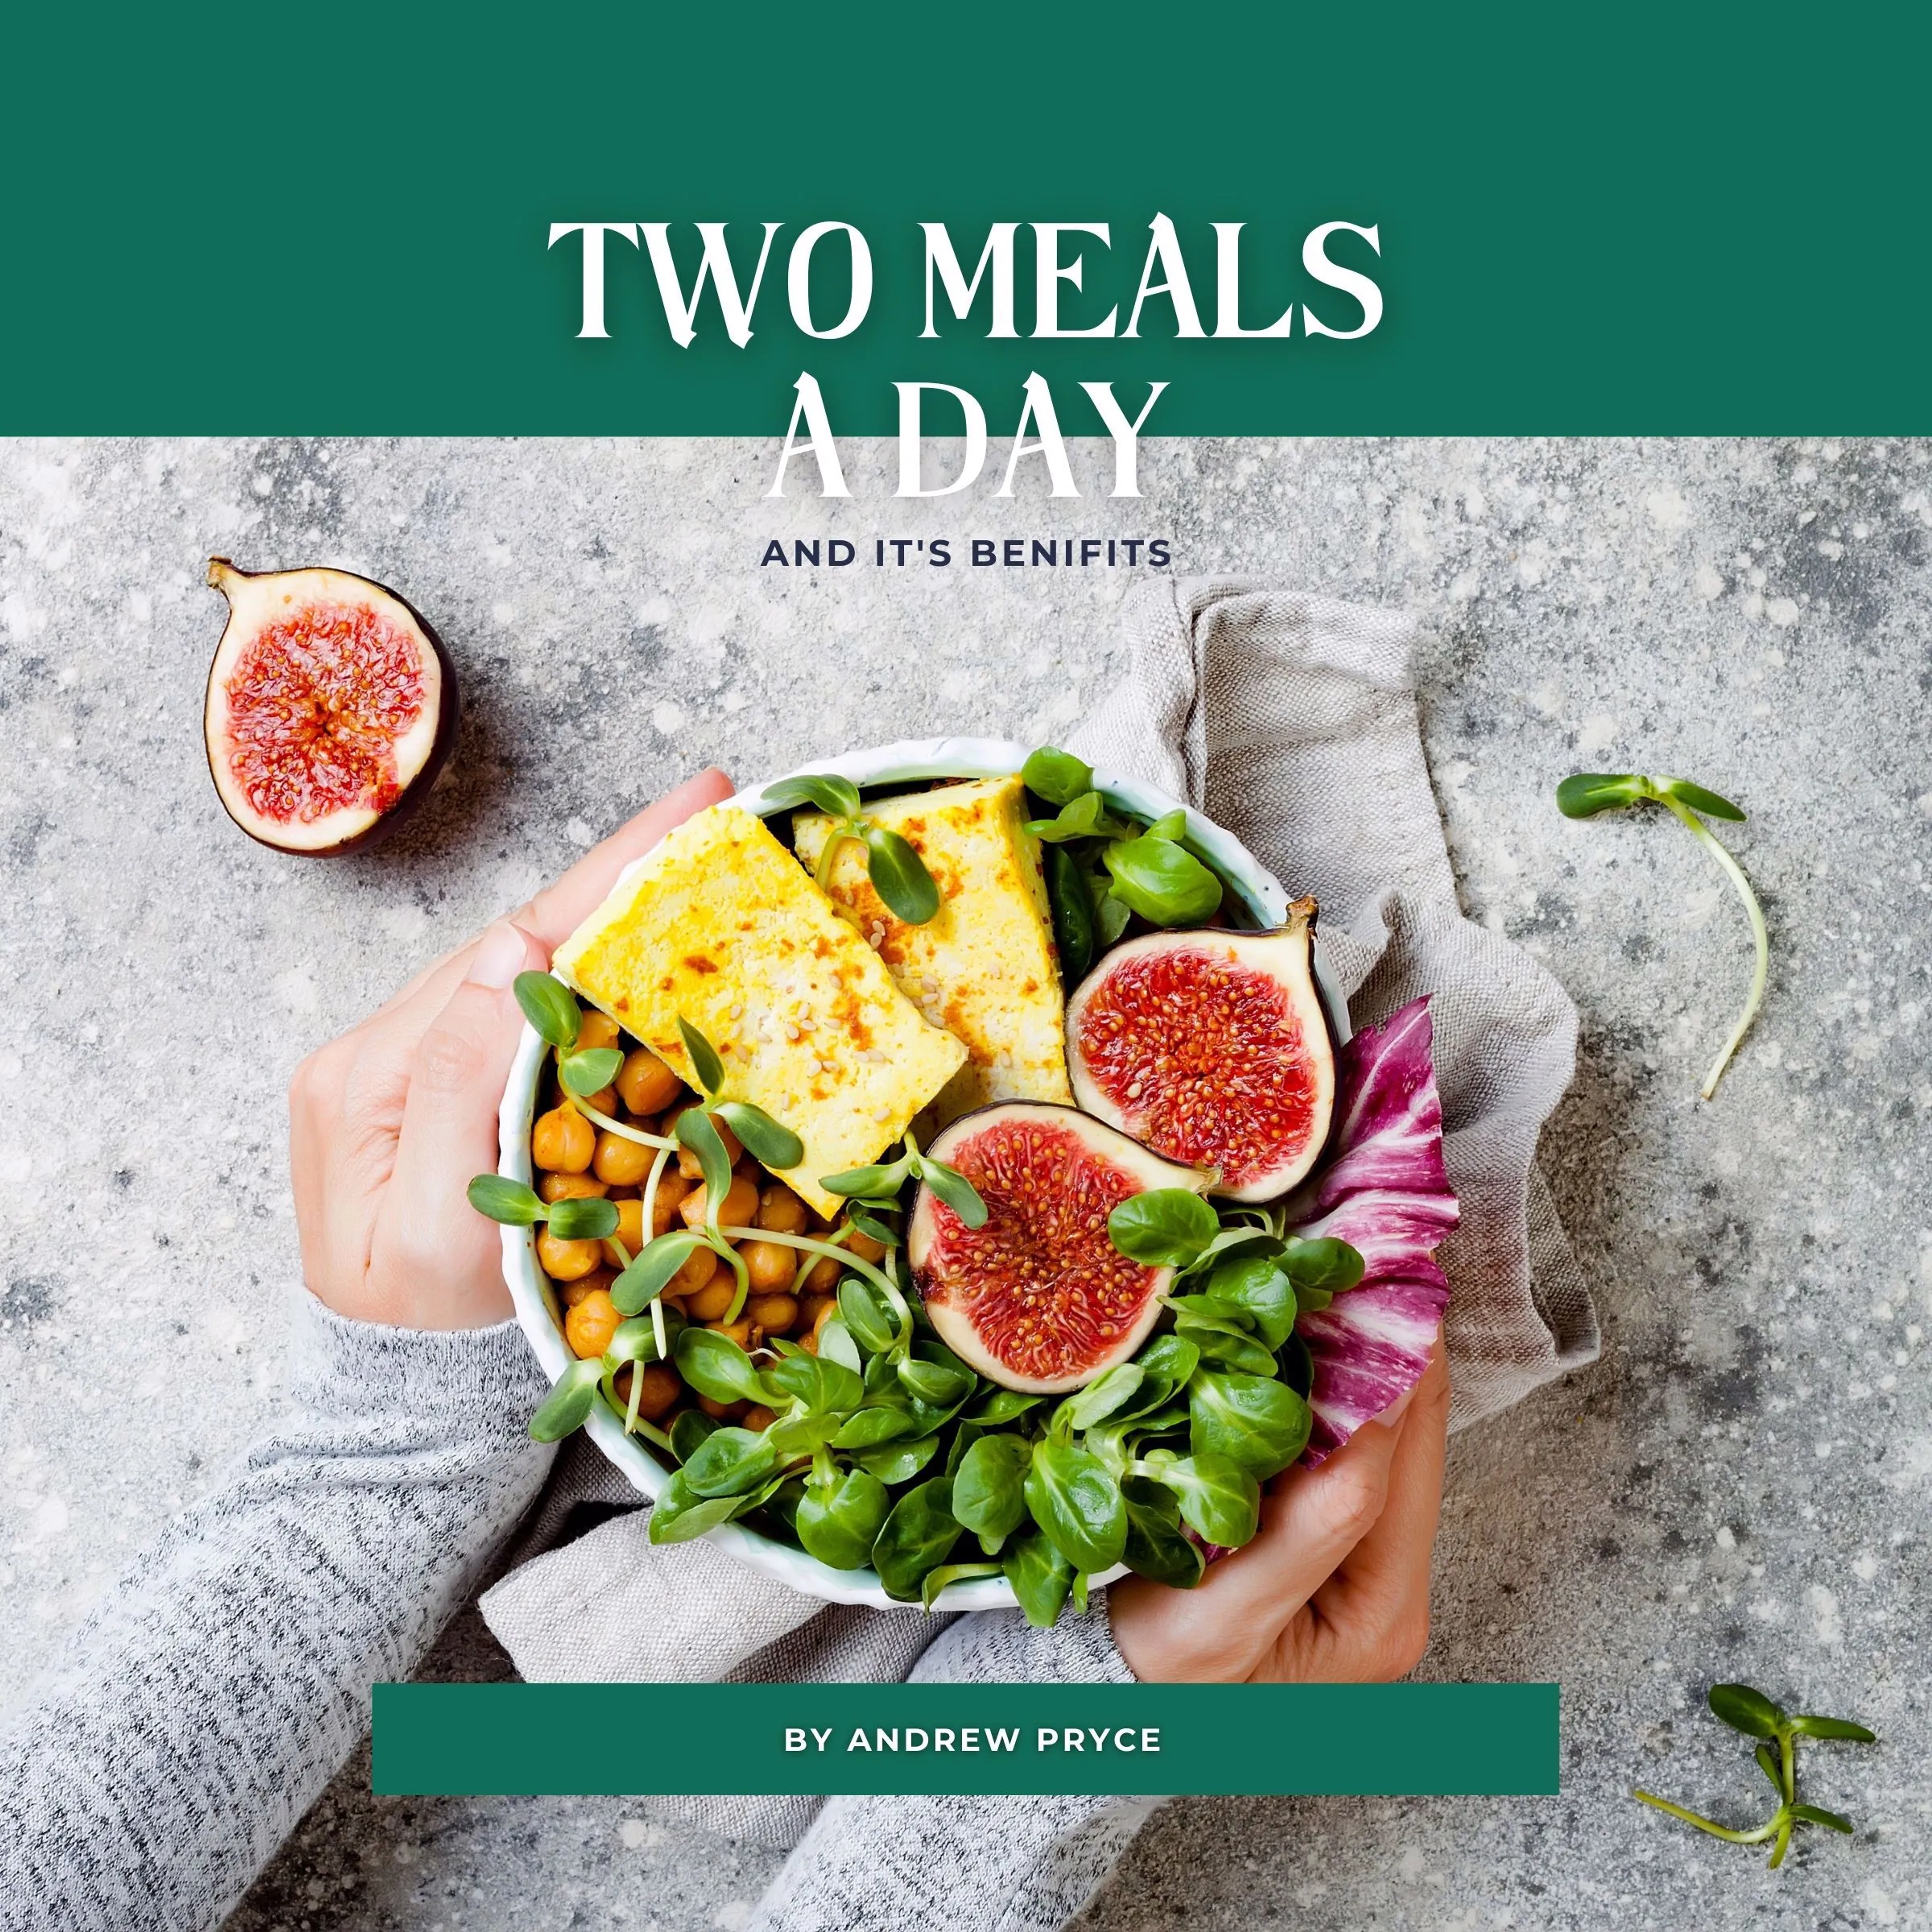 Two Meals a Day Audiobook by Andrew Pryce